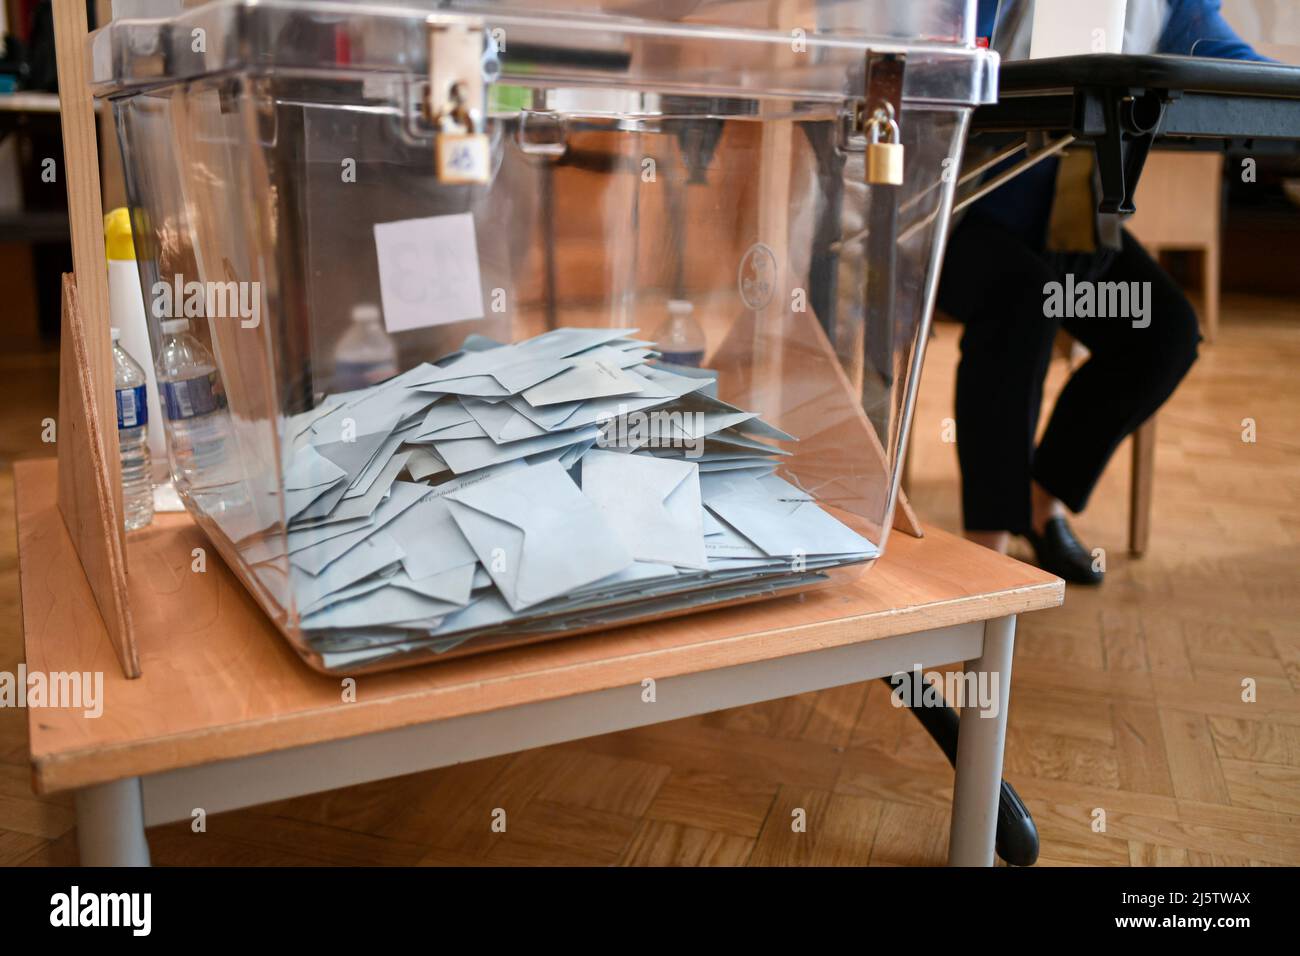 Paris, France, on April 24, 2022. Illustration picture shows ballot papers in their envelope placed in the ballot box in Paris, France, on April 24, 2022. French voters head to the polls to vote for the second round of the presidential election, to elect their new president of the Republic between Emmanuel Macron and Marine Le Pen. Photo by Victor Joly/ABACAPRESS.COM Stock Photo